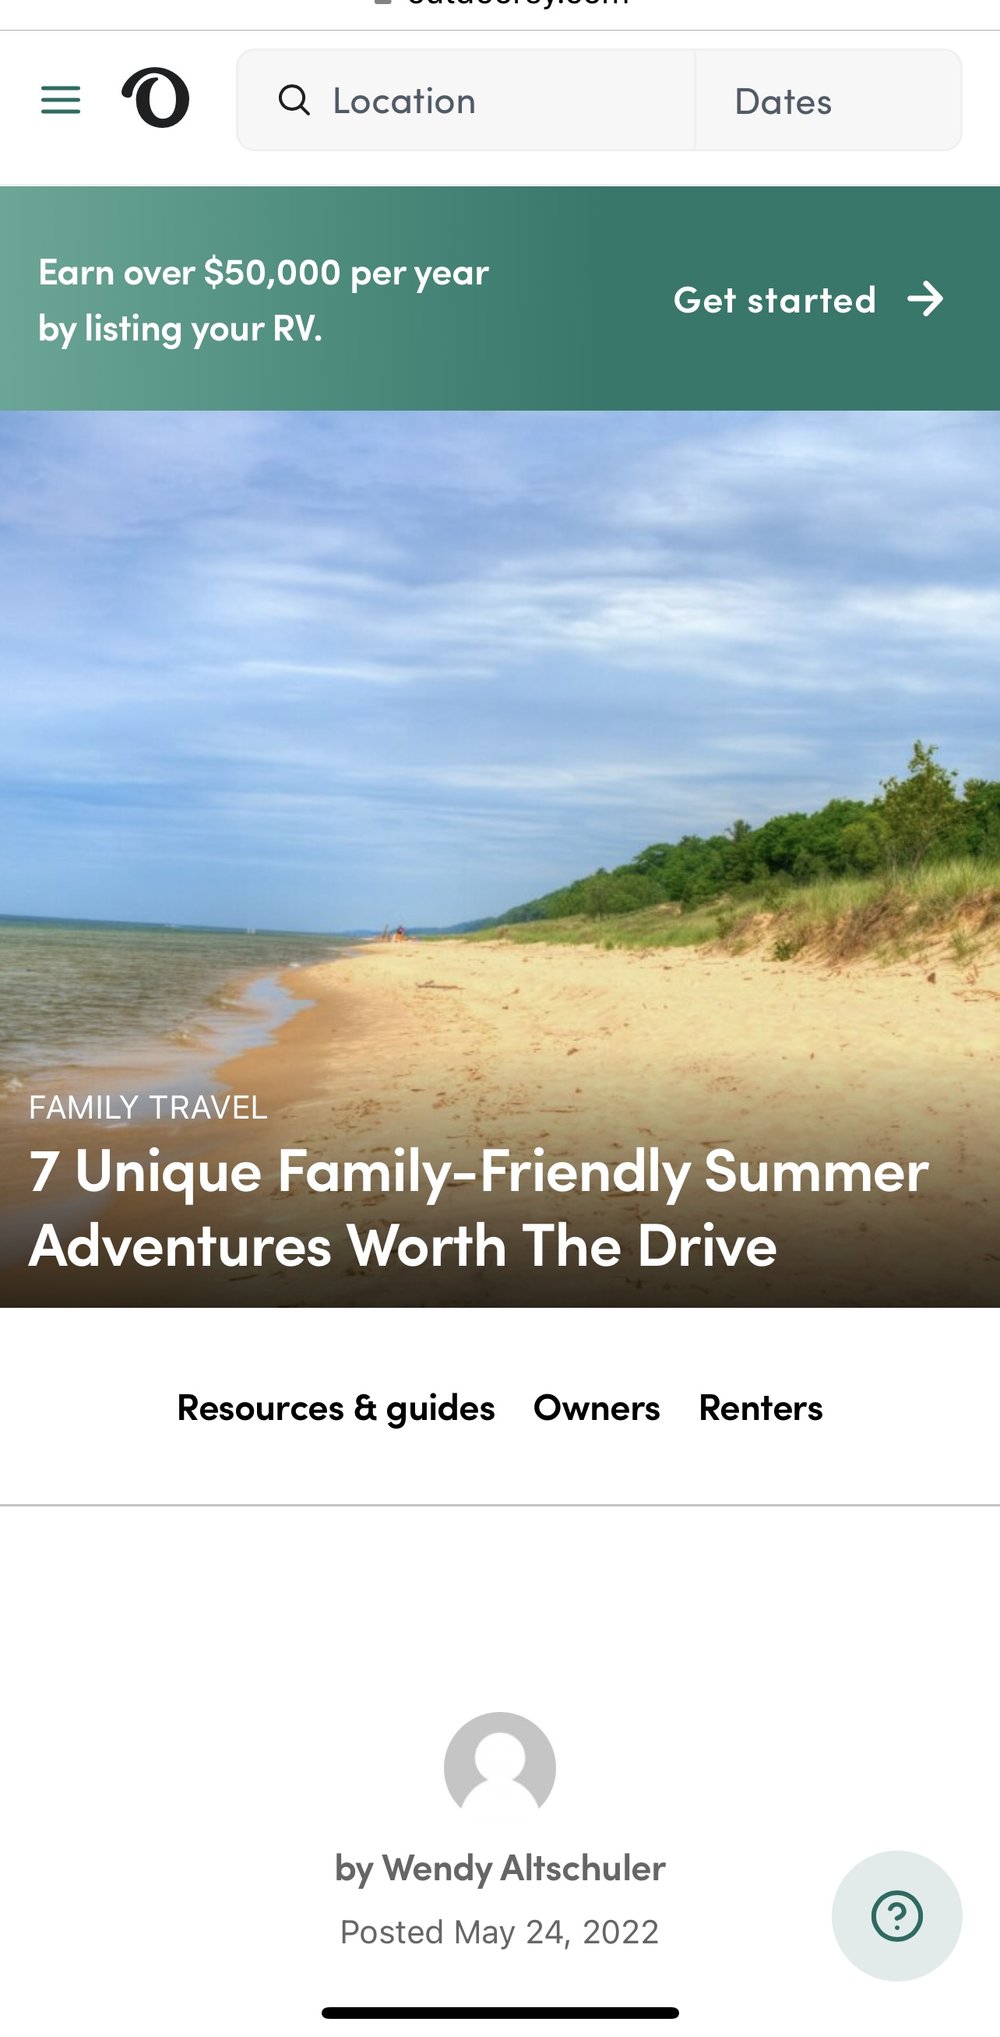 7 Unique Family-Friendly Summer Adventures Worth The Drive